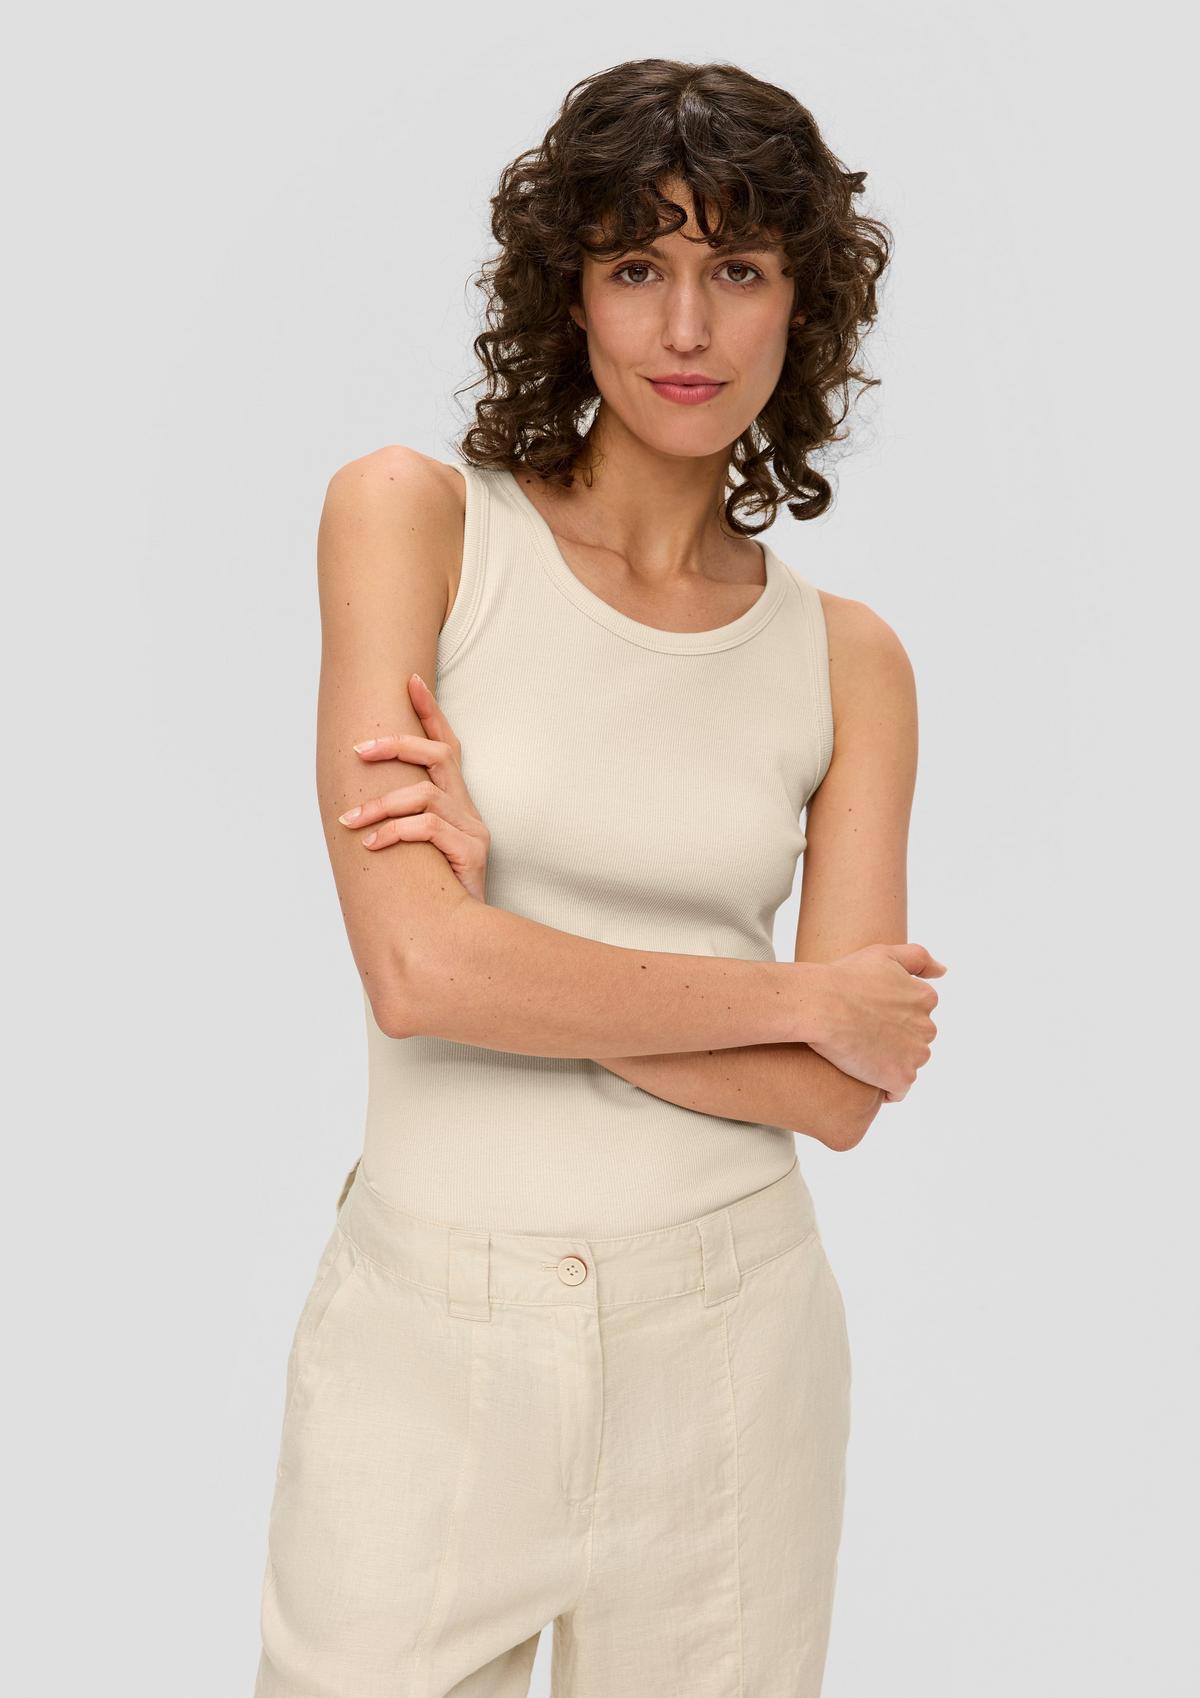 s.Oliver Slim-fitting tank top with a ribbed texture